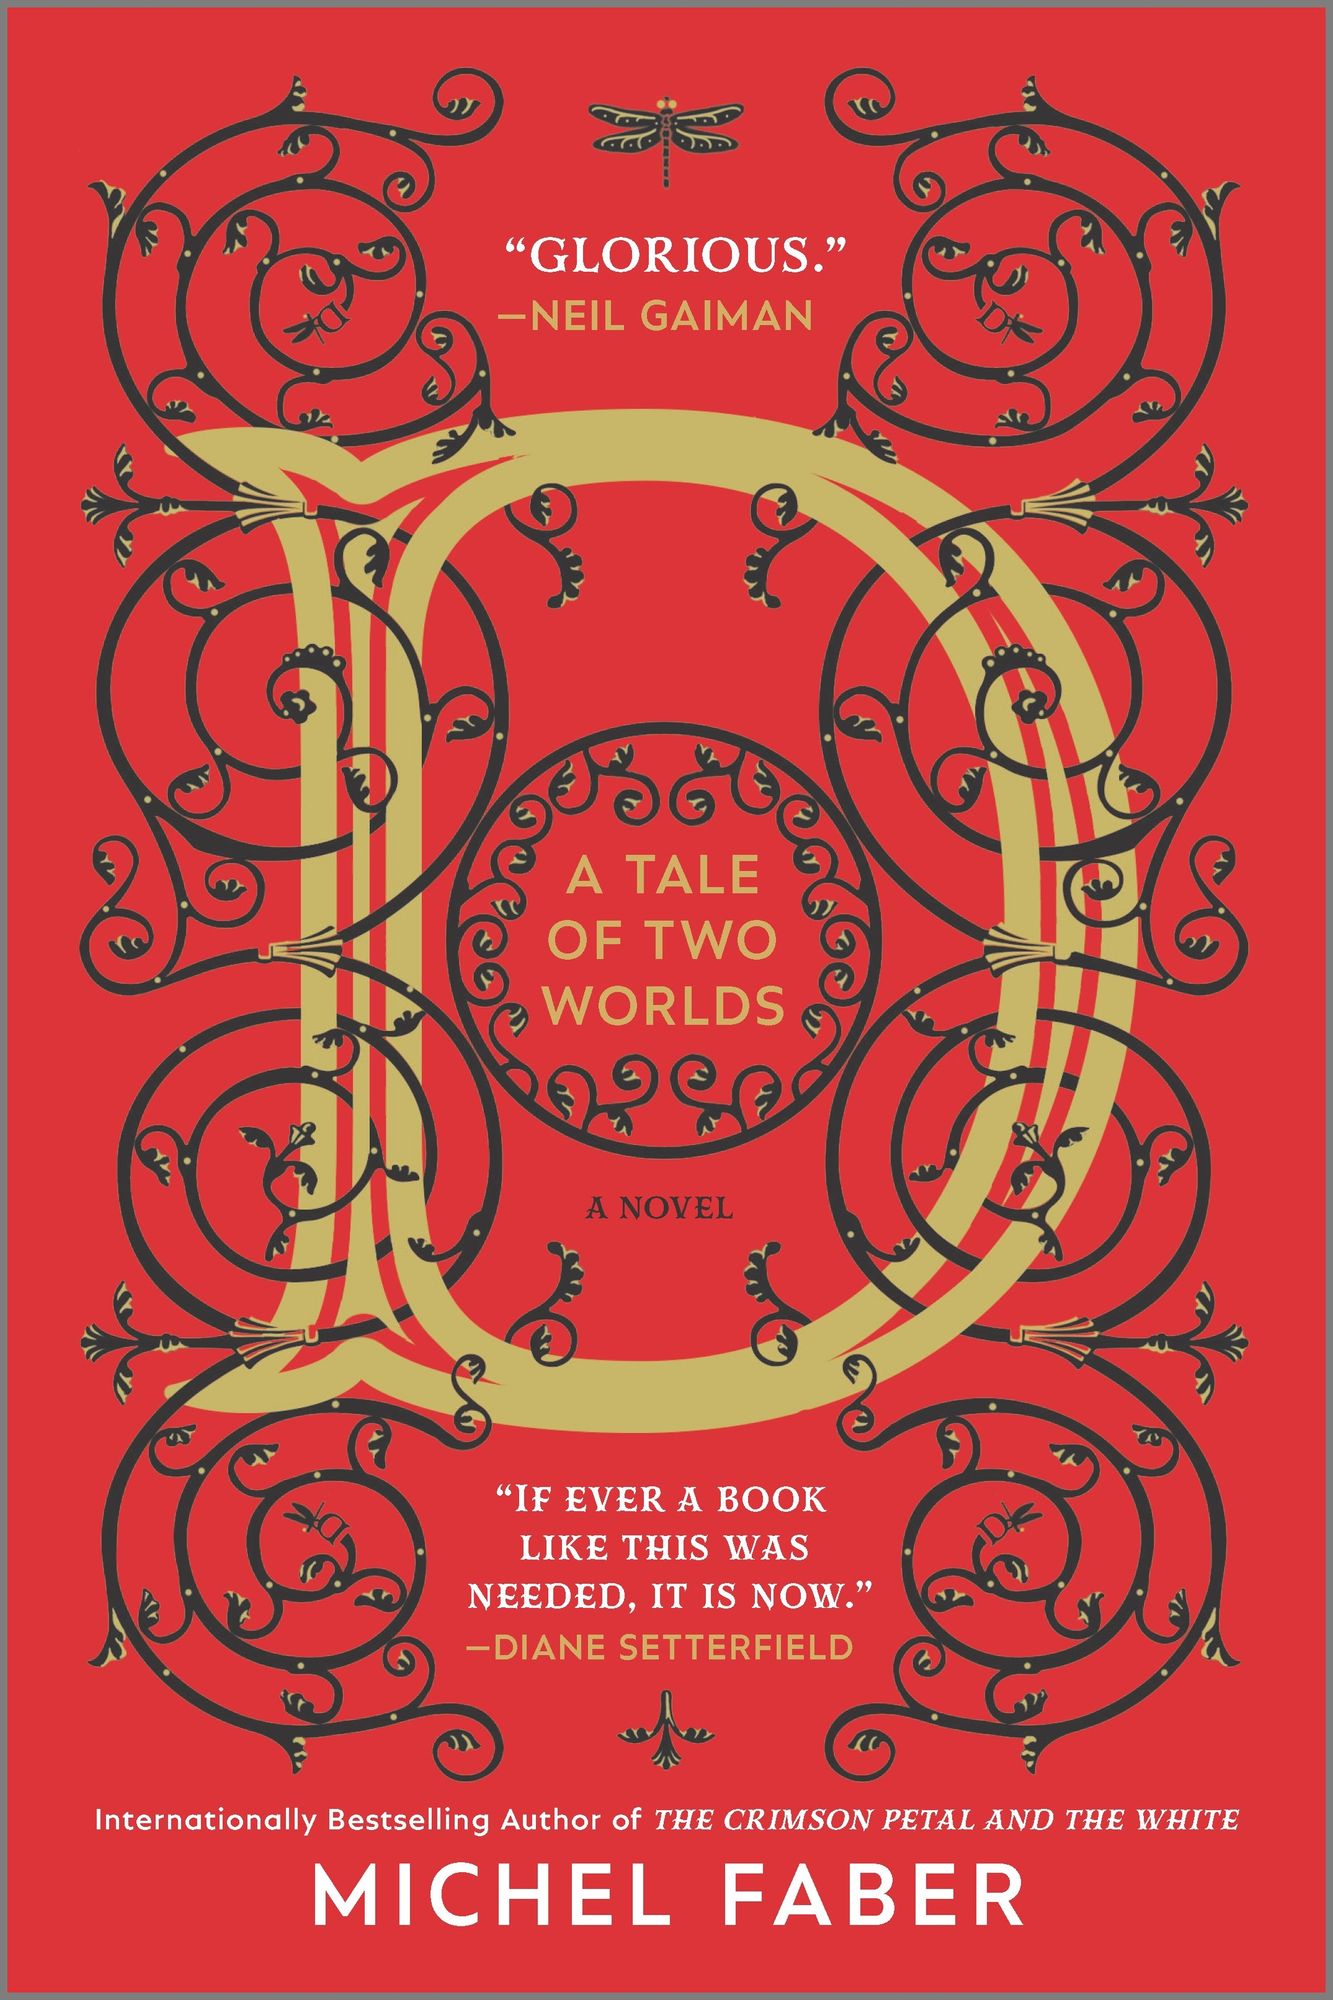 D (A Tale of Two Worlds) by Michel Faber